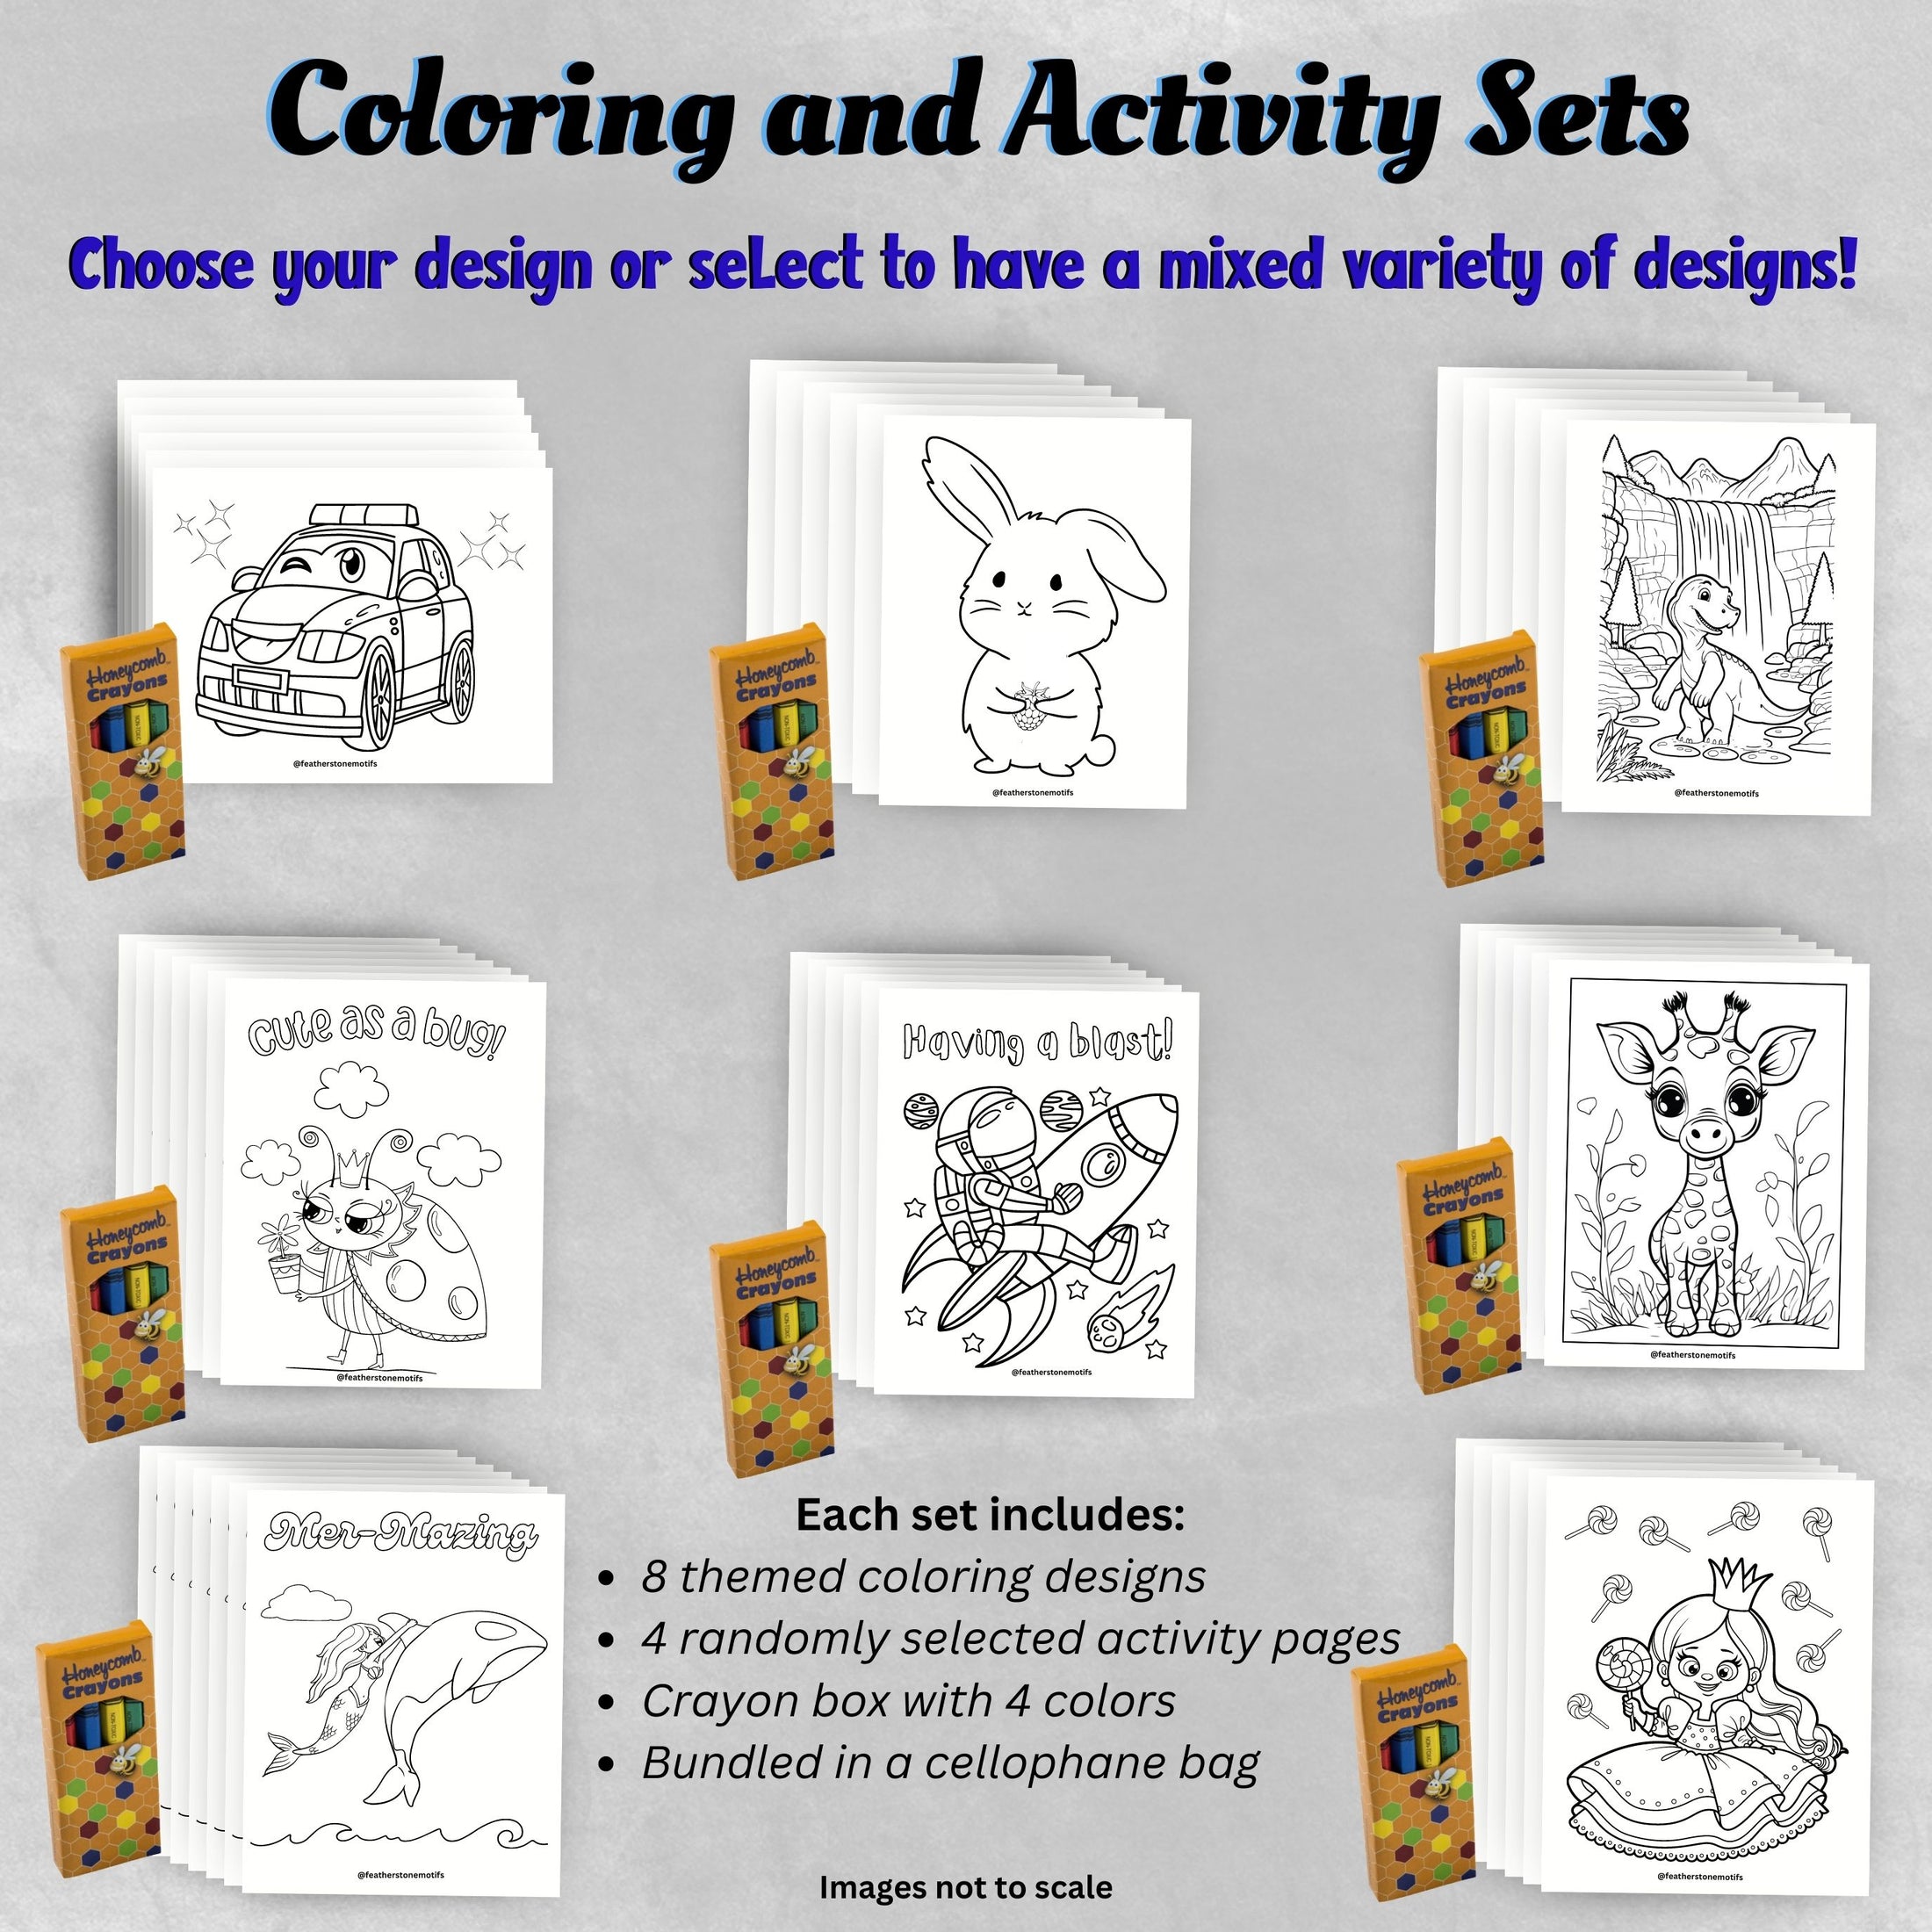 This image shows the cover page with seven different coloring and activity sets.